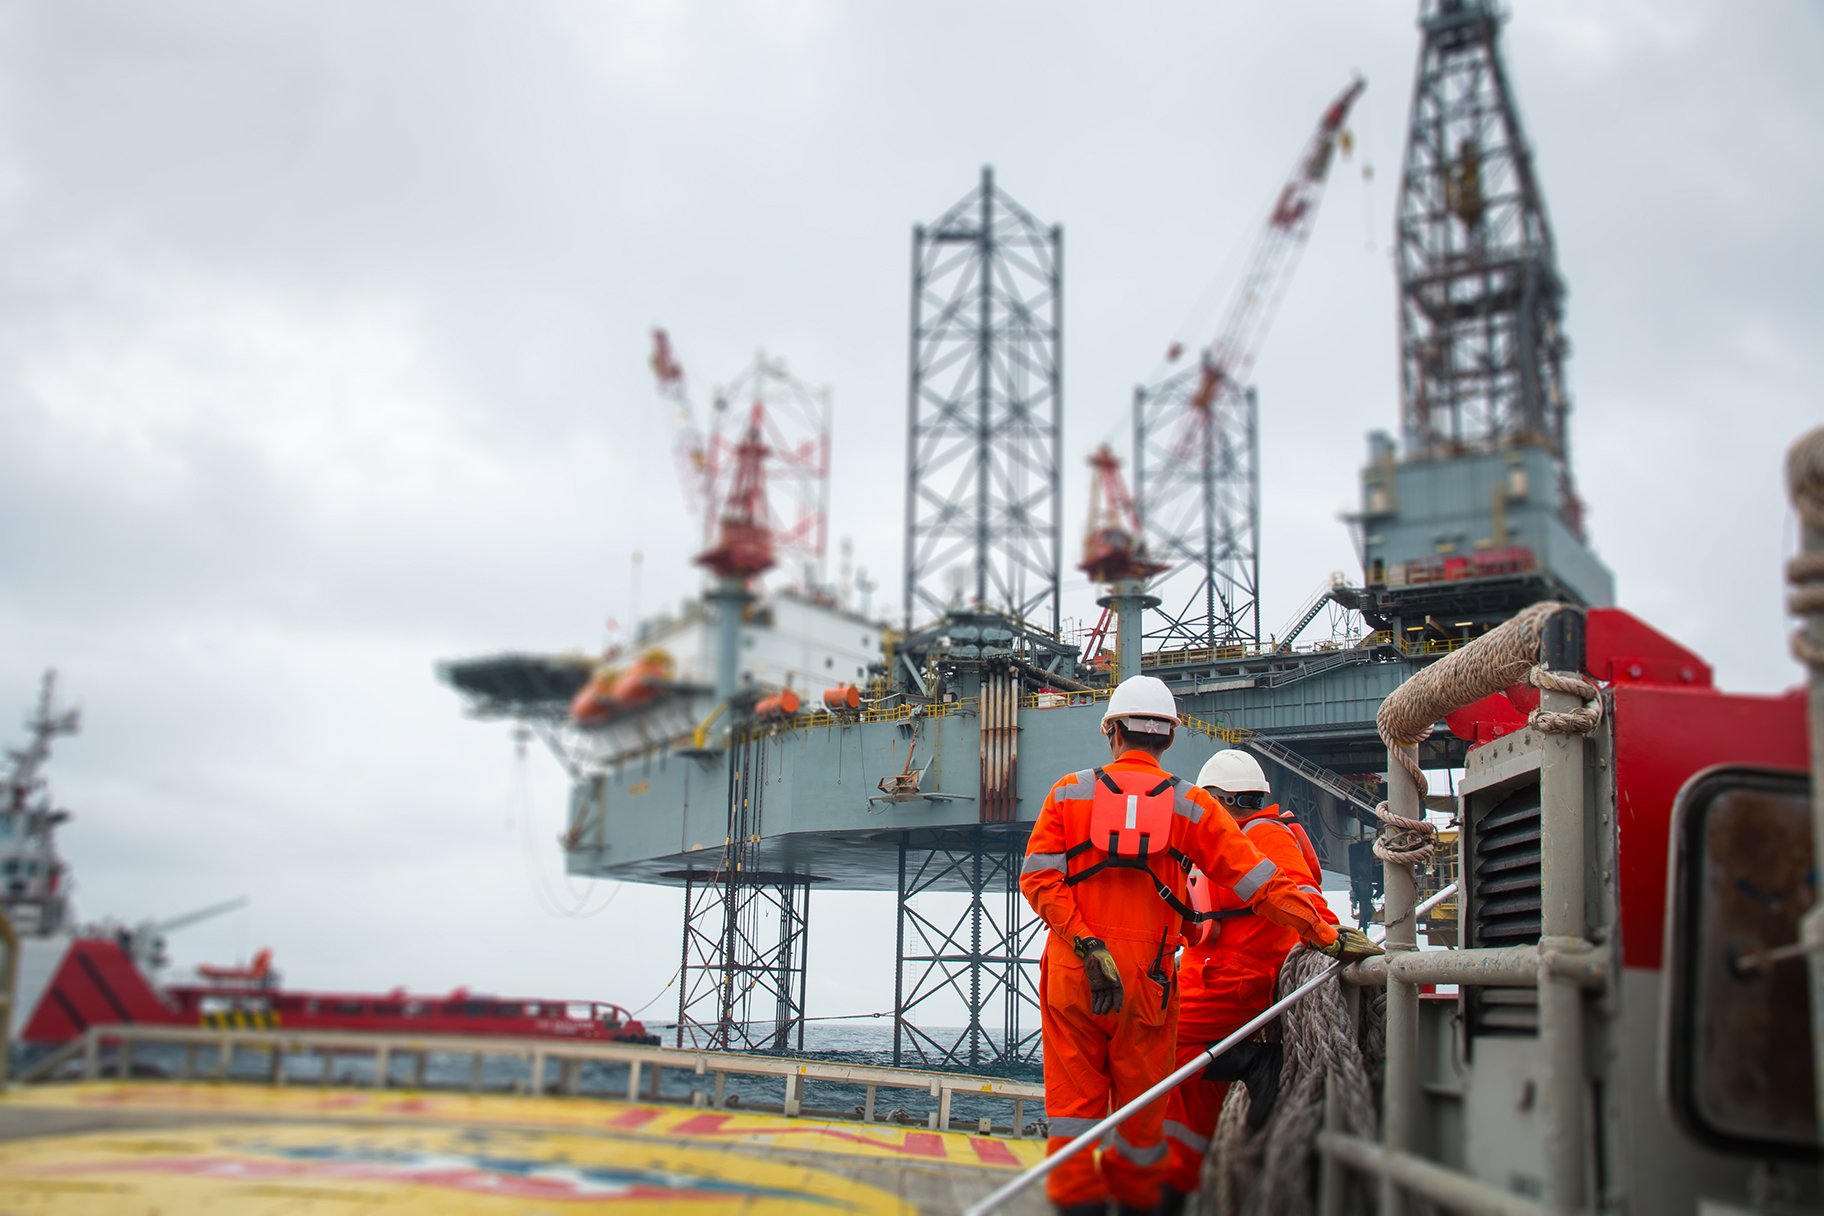 Technicians checking the pneumatic control valve on an offshore oil rig